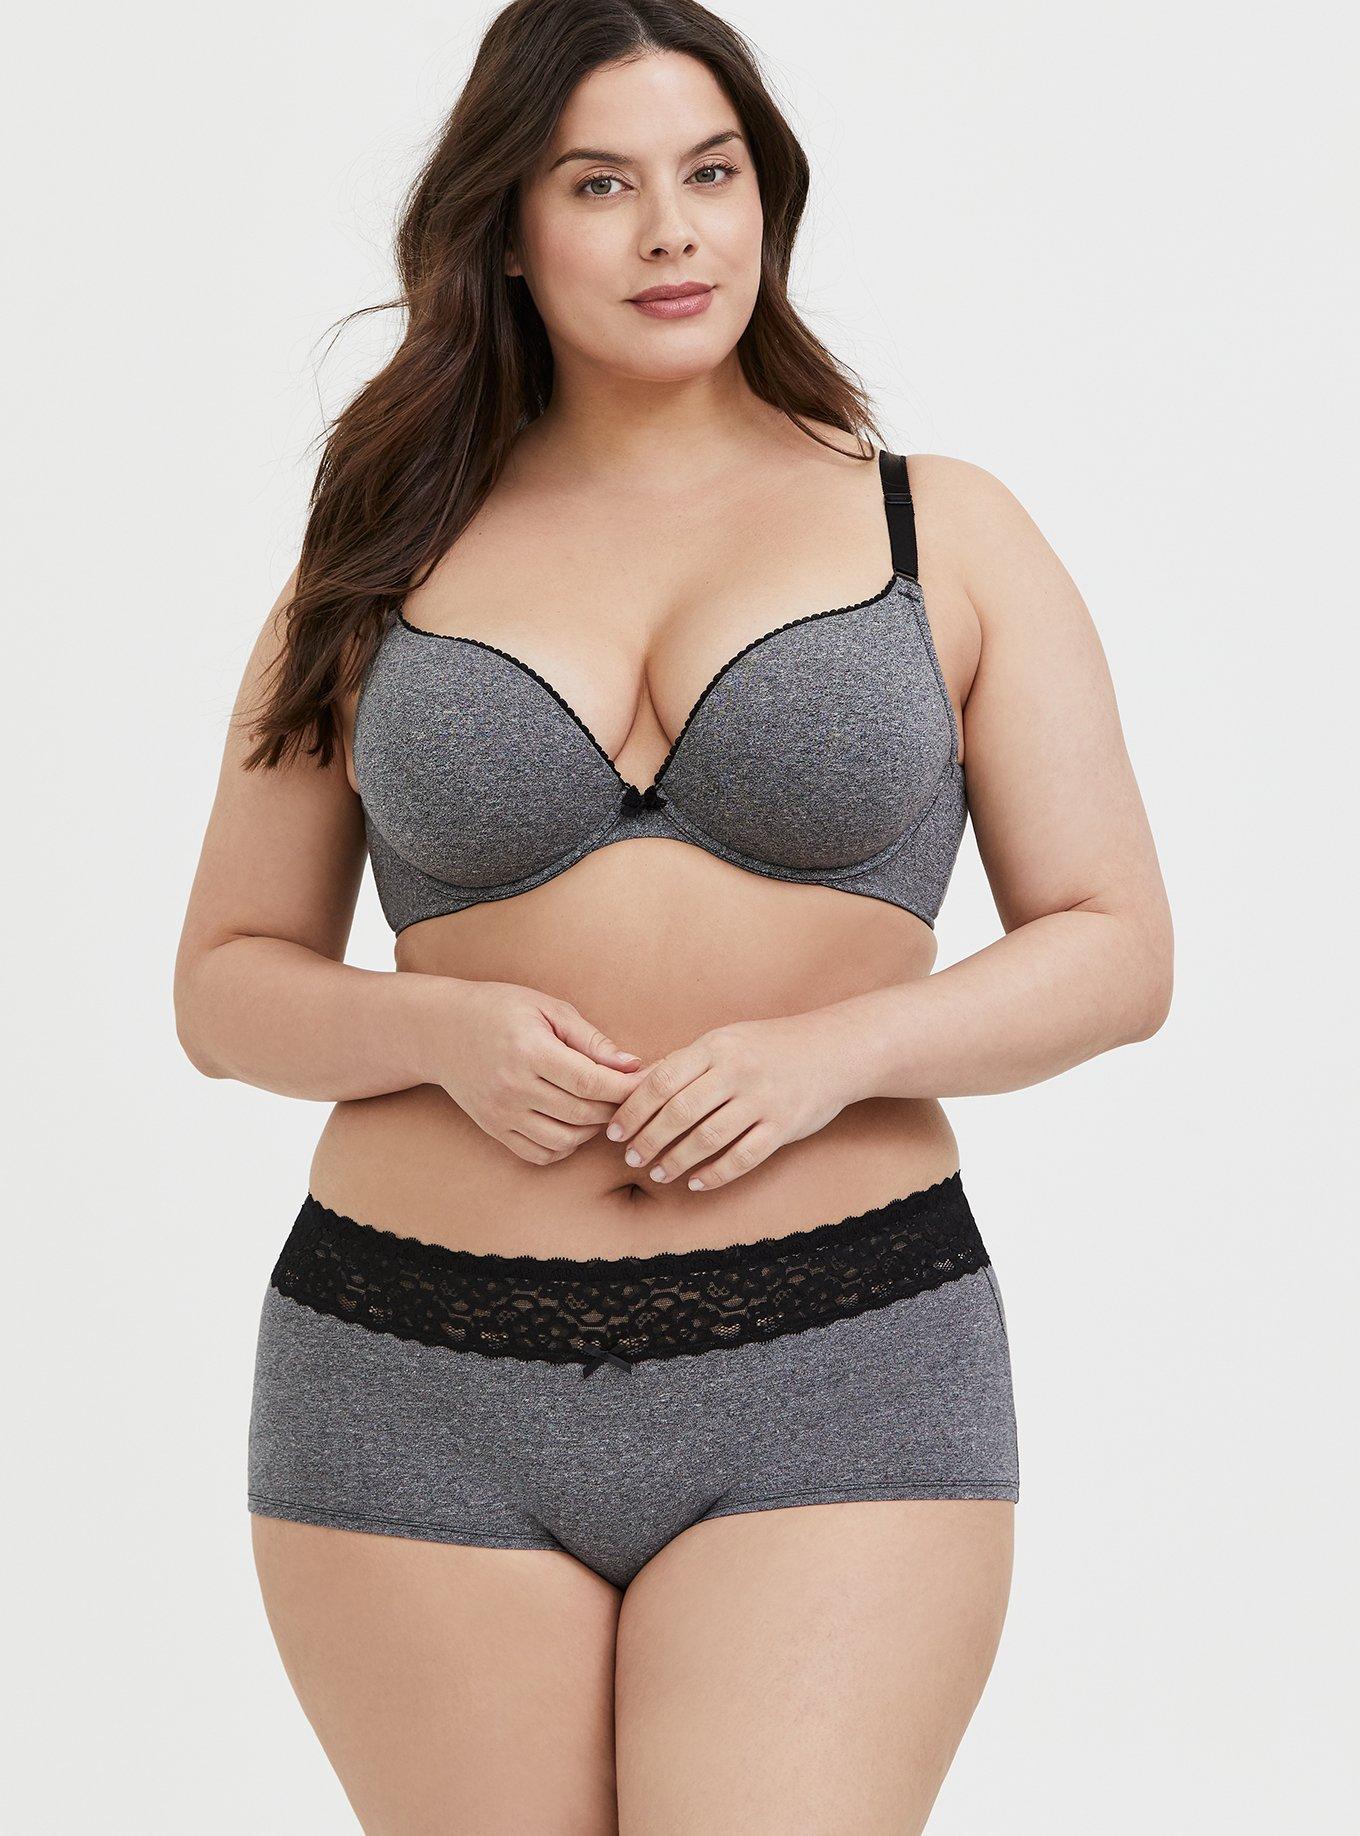 TORRID PUSH-UP WIRE-FREE BRA - GREY WITH 360° BACK SMOOTHING size 42 DDD